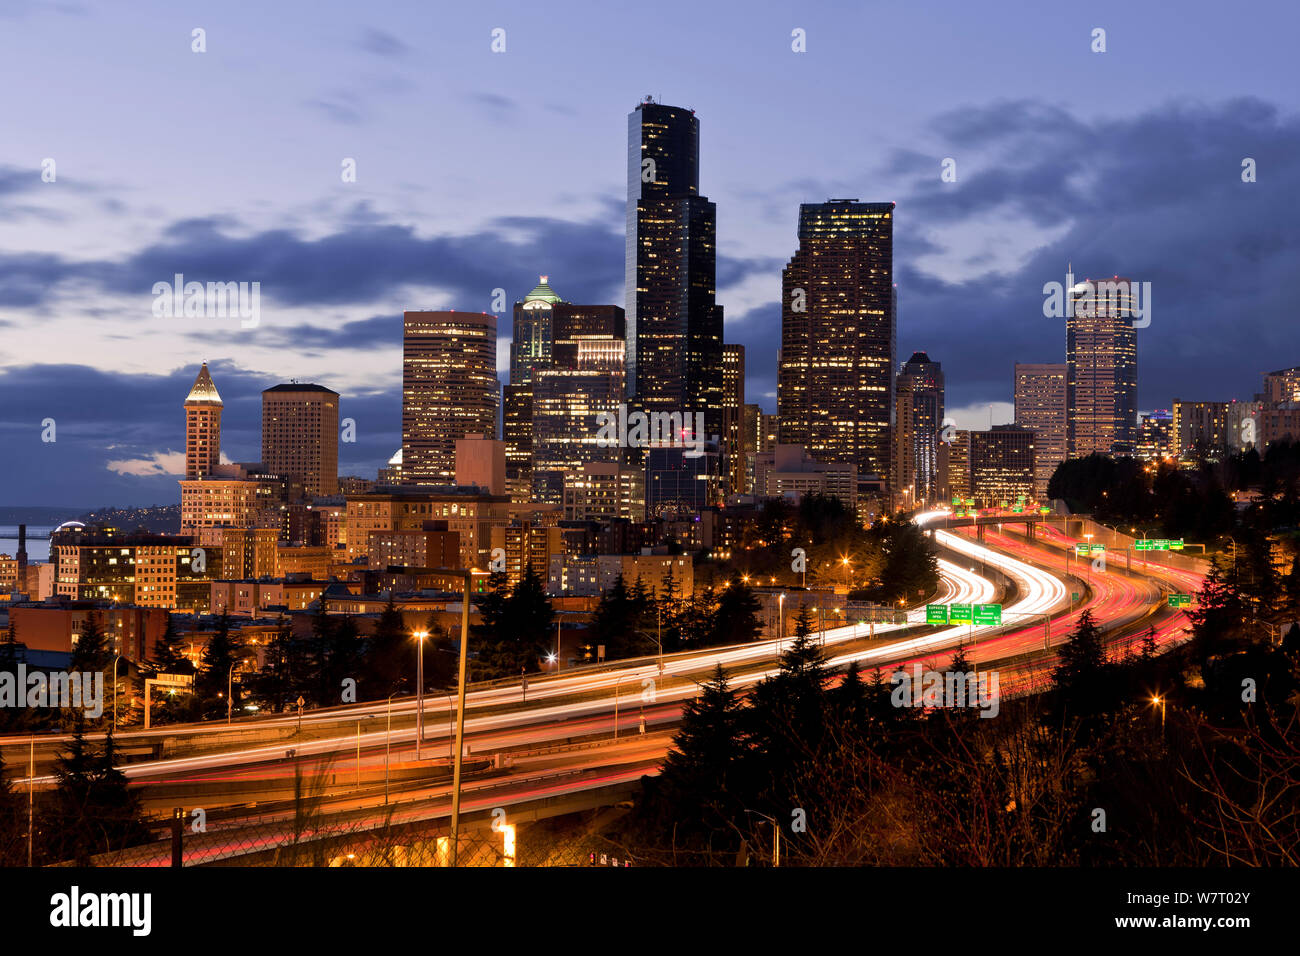 View of the Seattle skyline from the 12th Avenue South bridge, Washington, USA. March 2013. Stock Photo